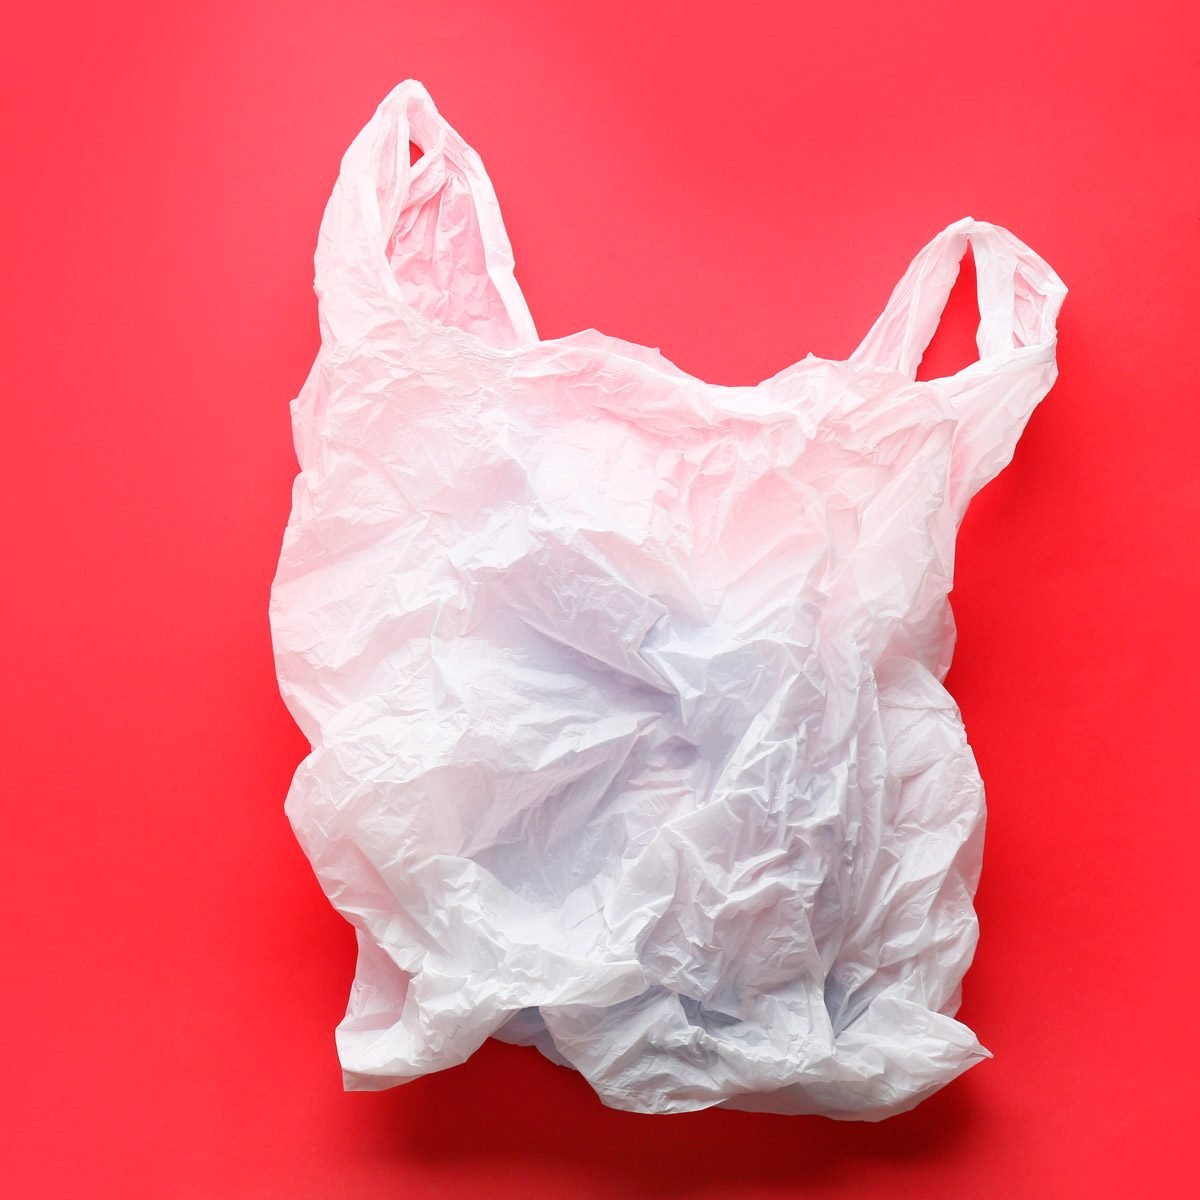 10 Ways to Organize and Store Plastic Bags | Family Handyman